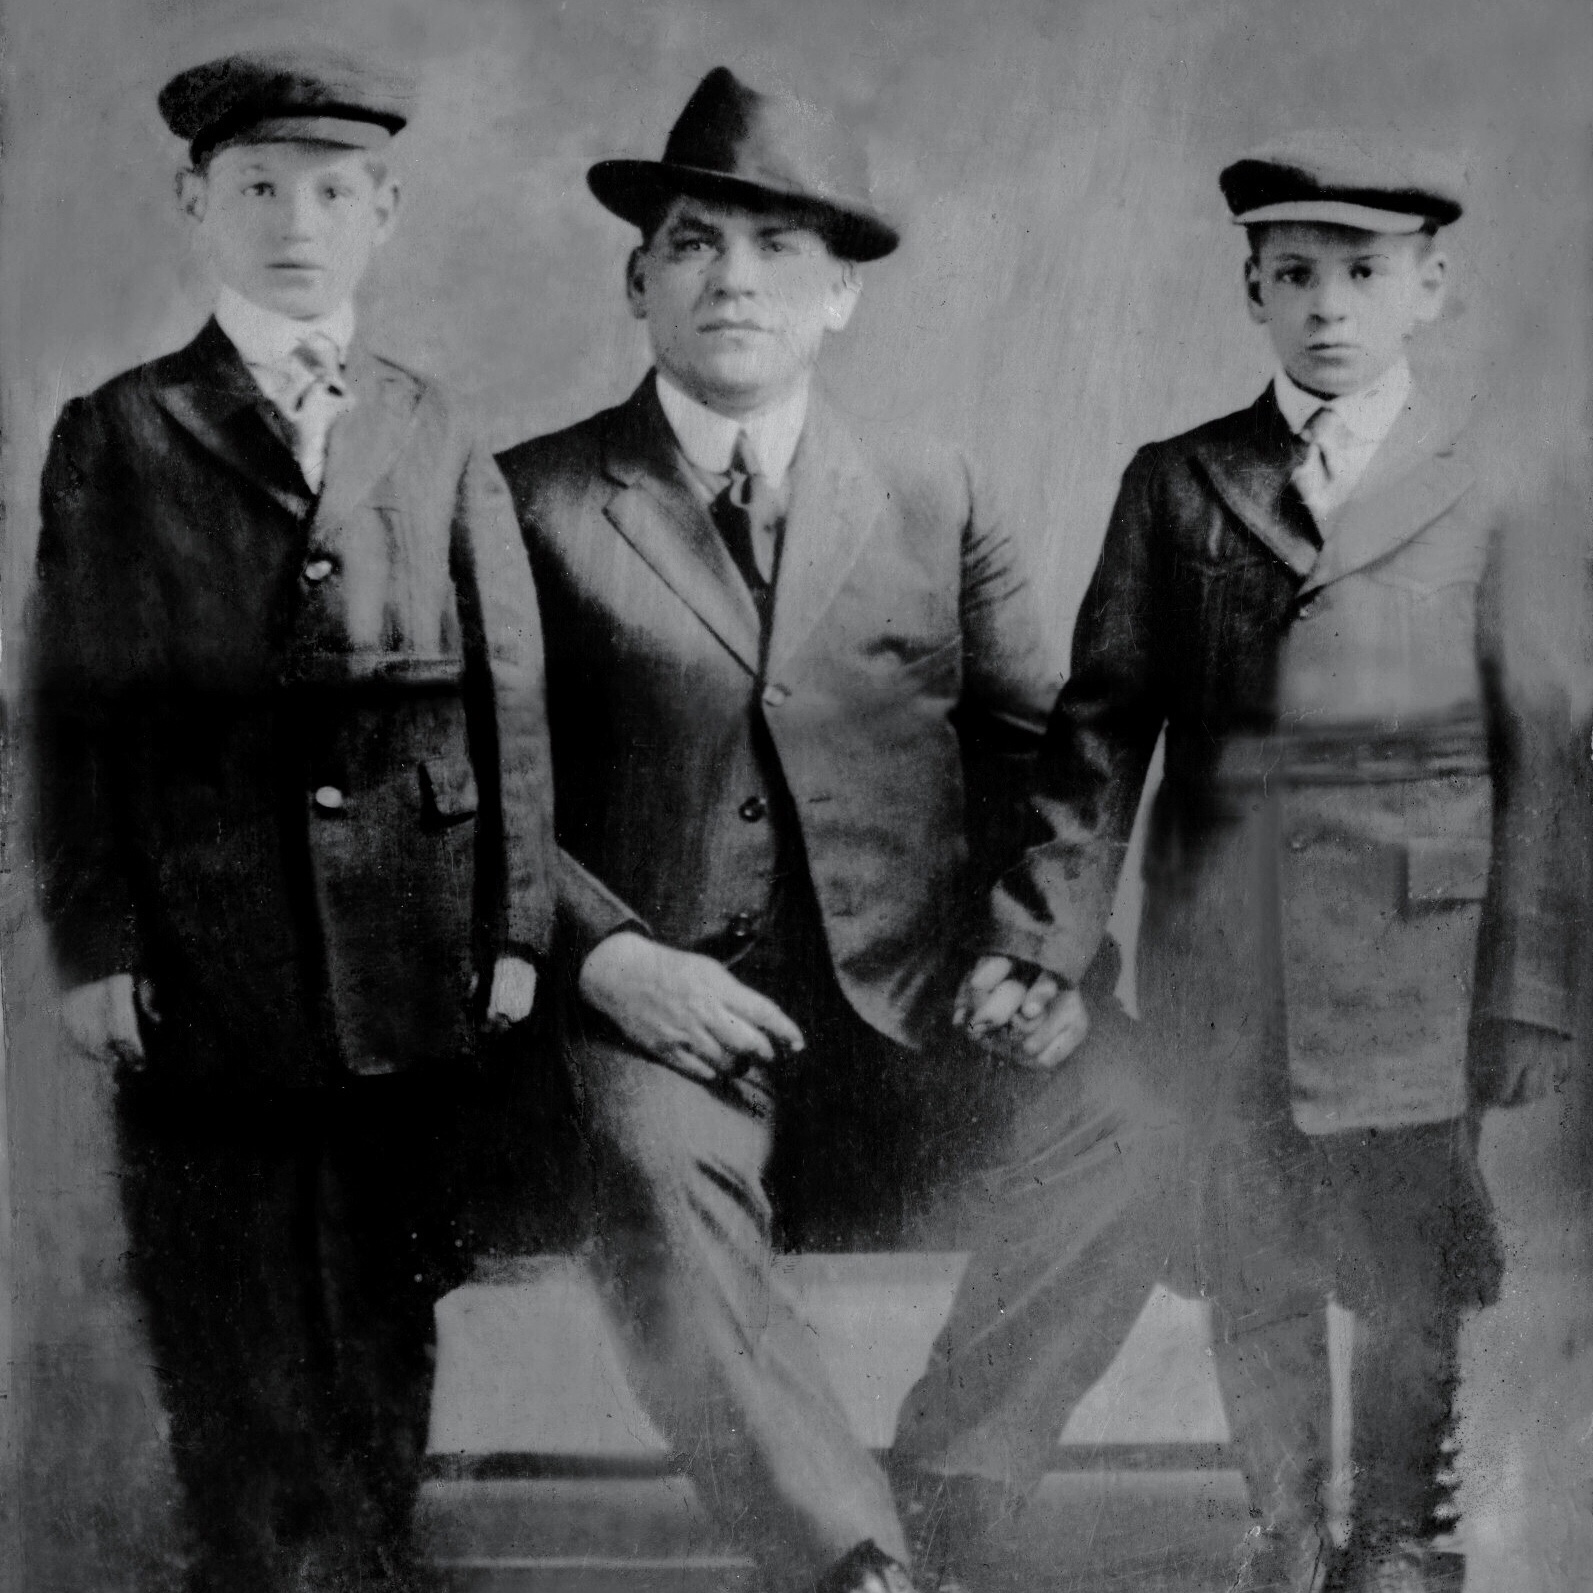 Frank's Great Grandfather and his Two Sons